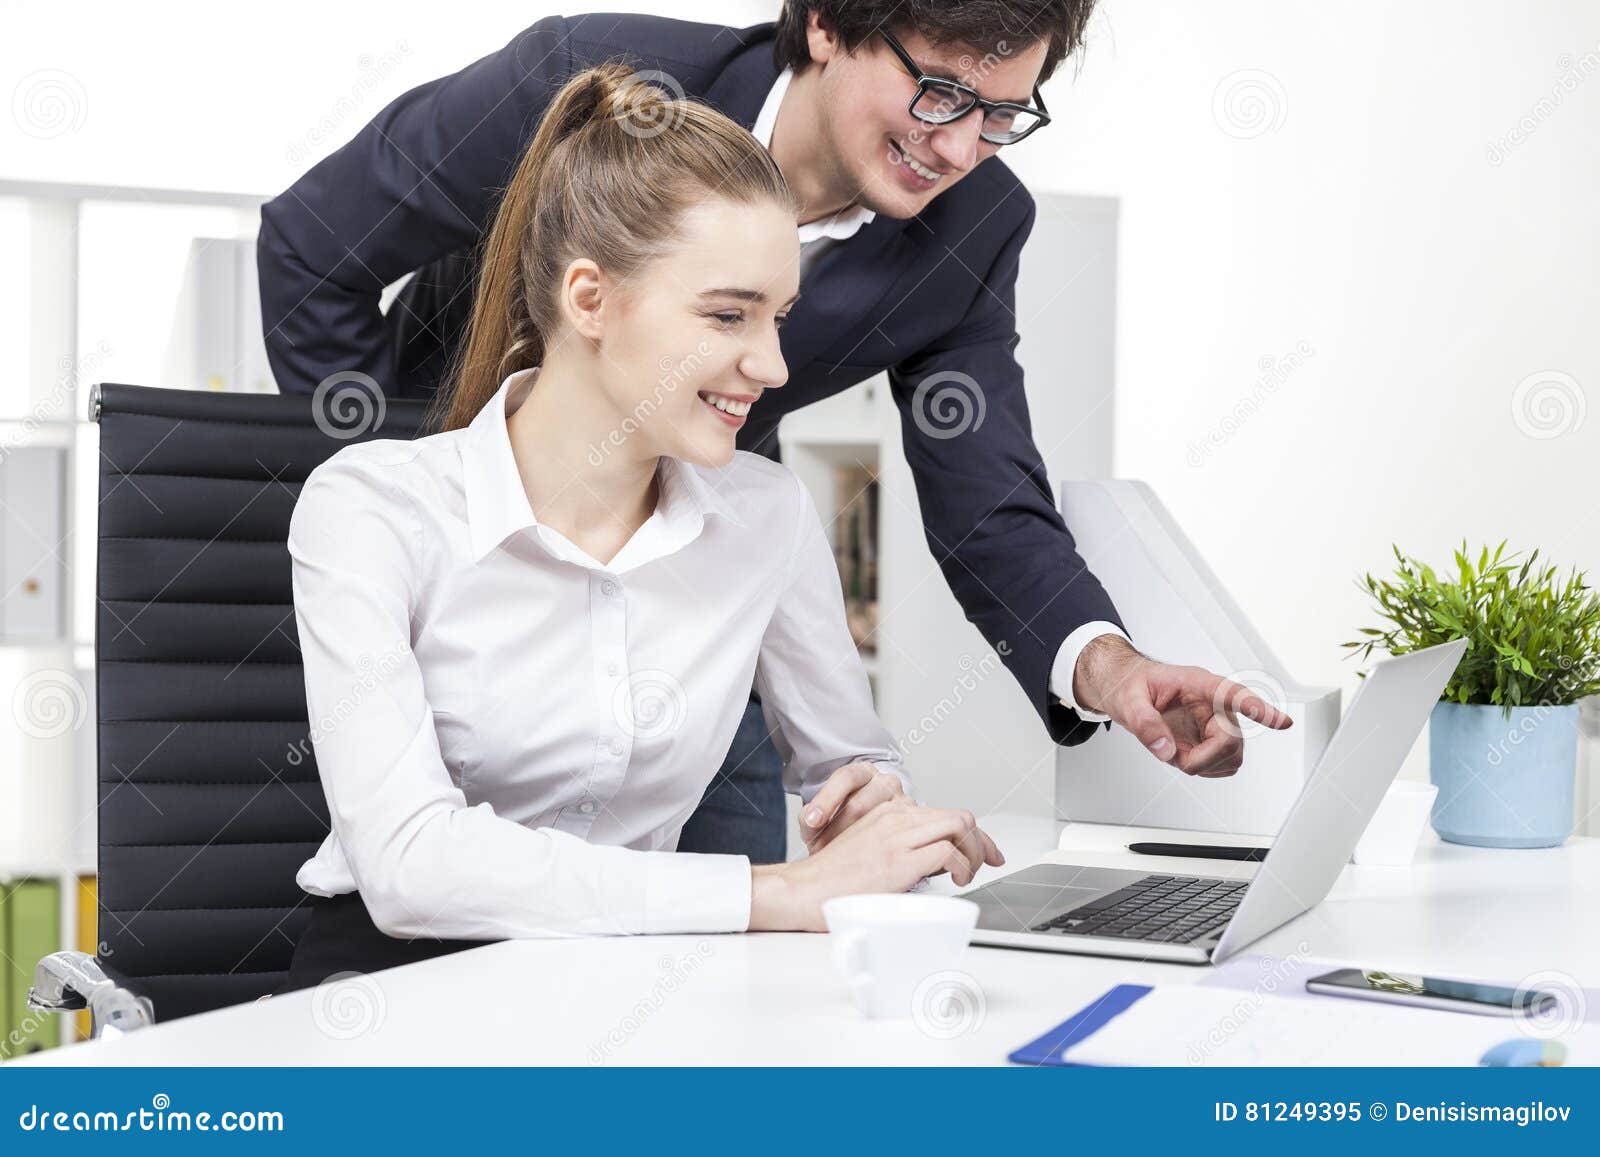 Two Coworkers Watching a Funny Video at Lunch Break Stock Image - Image of  portrait, sitting: 81249395